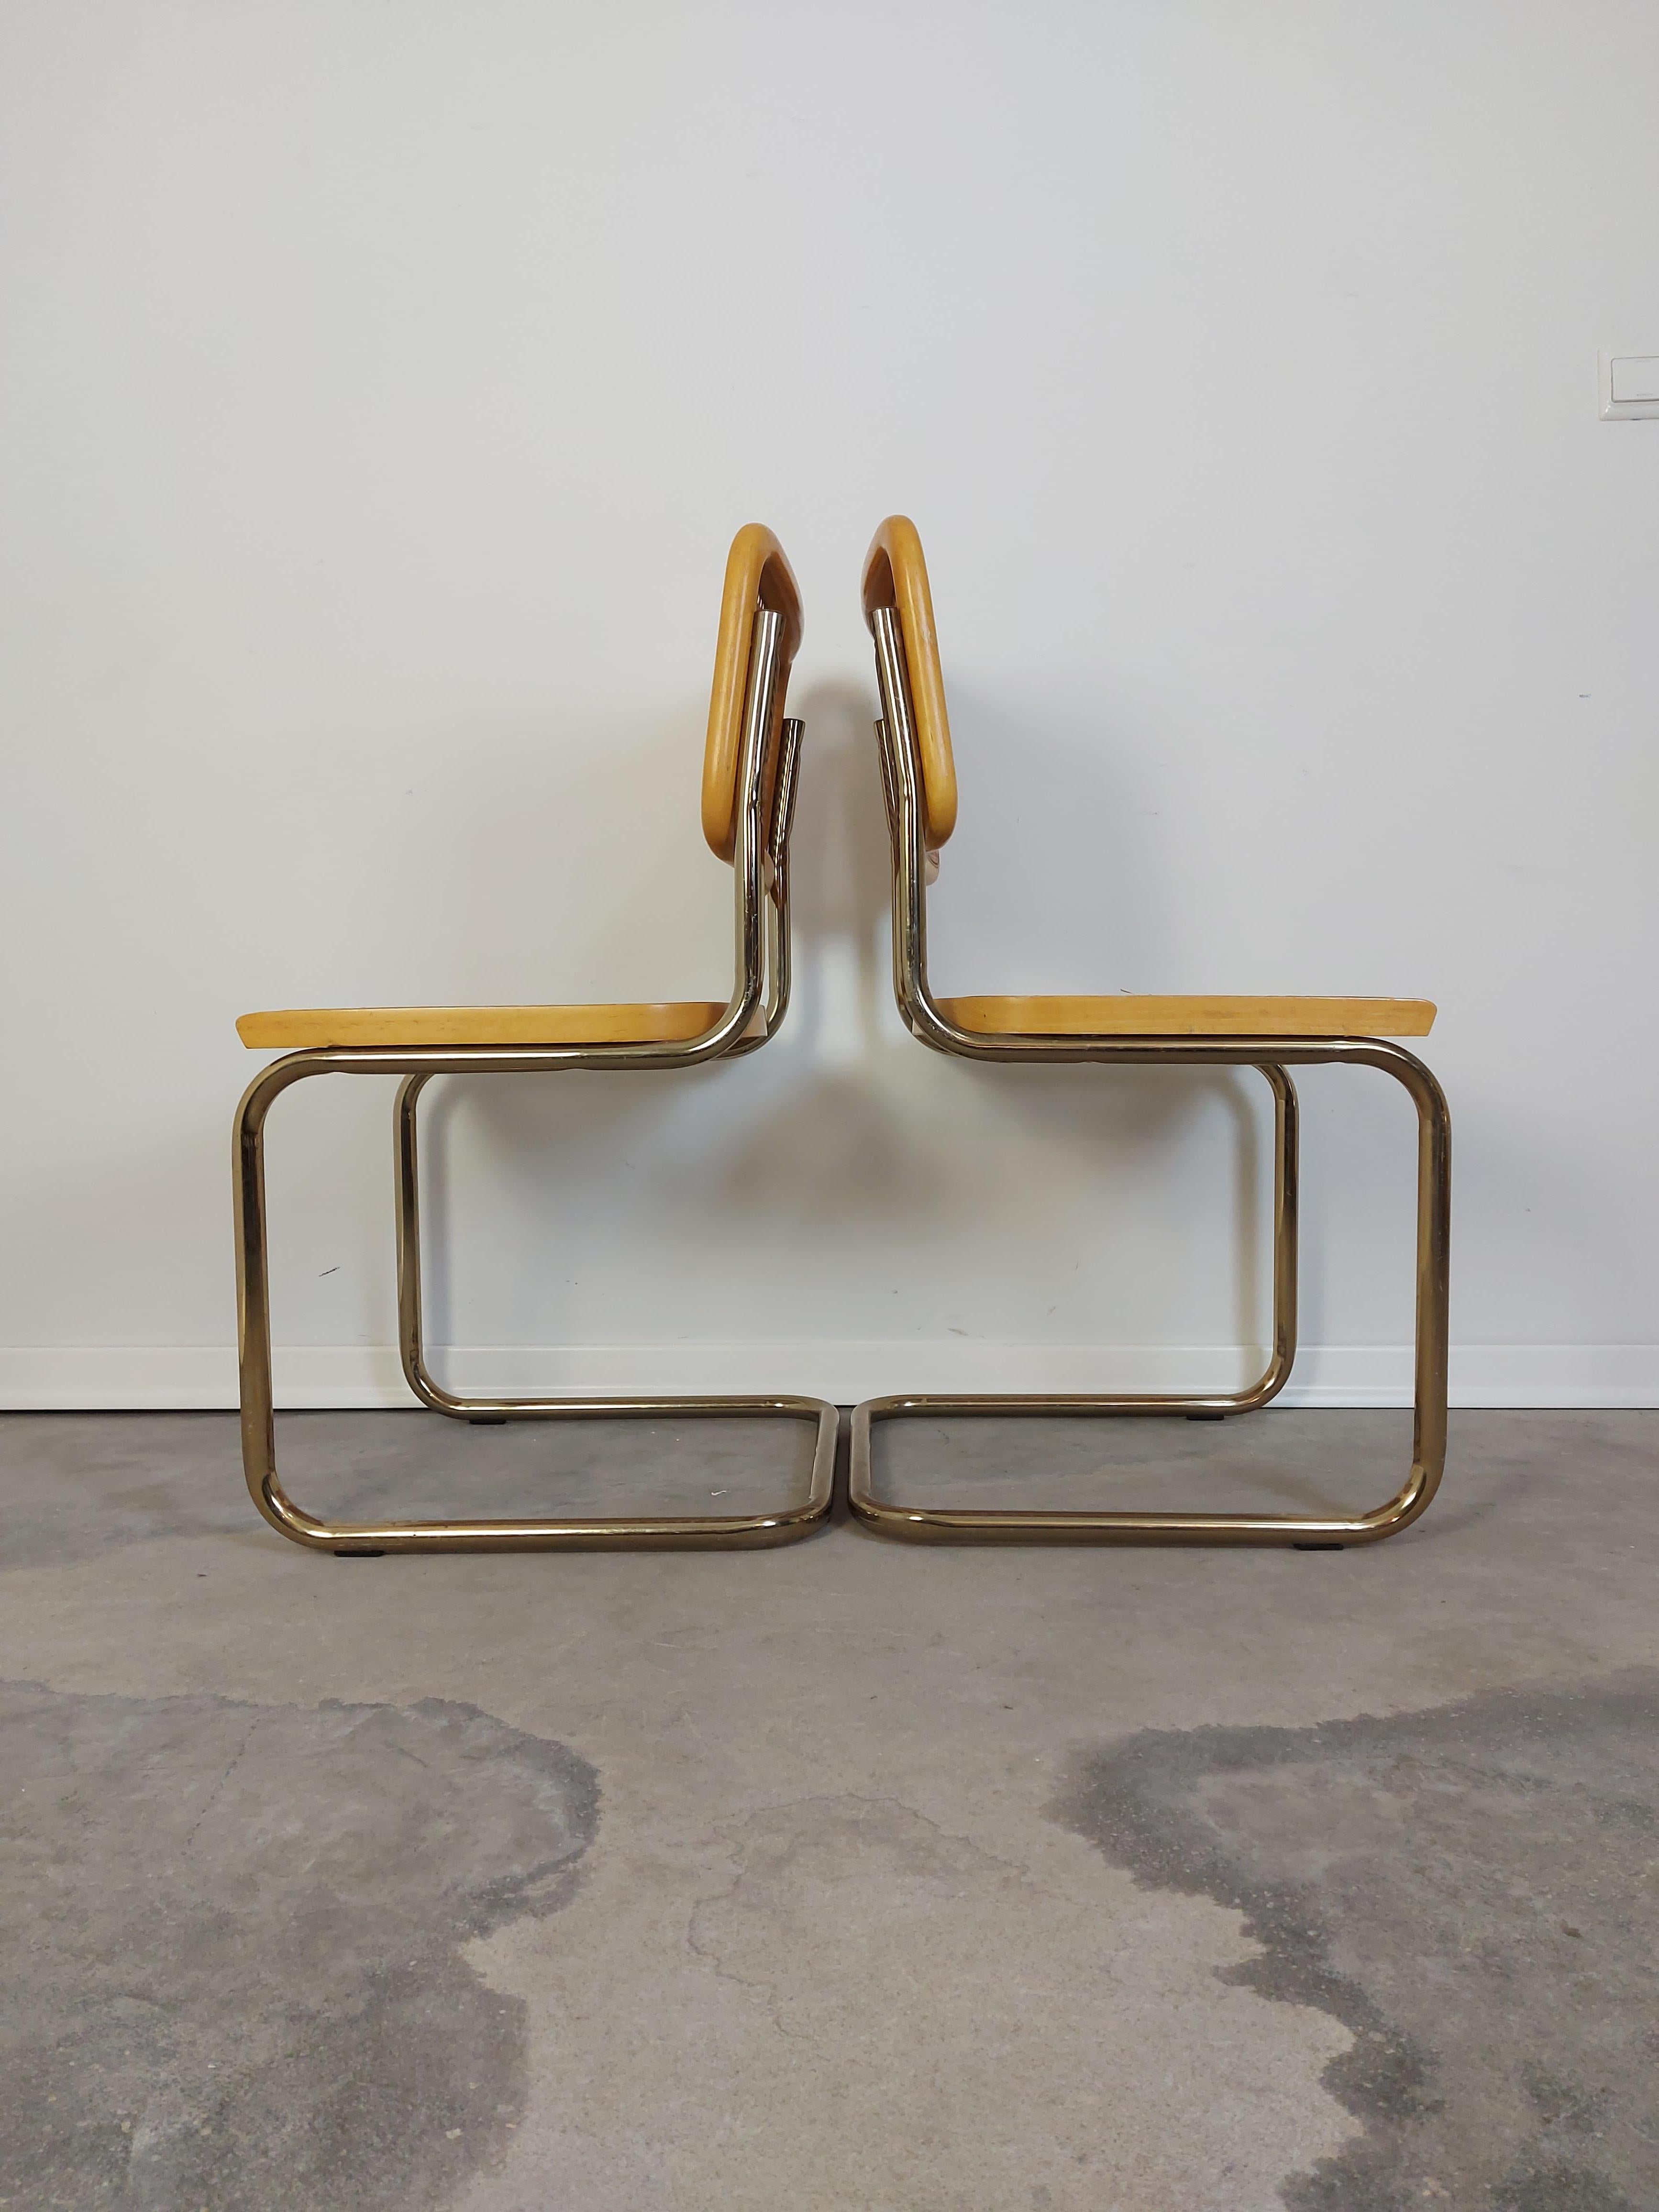 Metal CESCA Chair, 1980s, Pair Design Classic with Gilded Frame